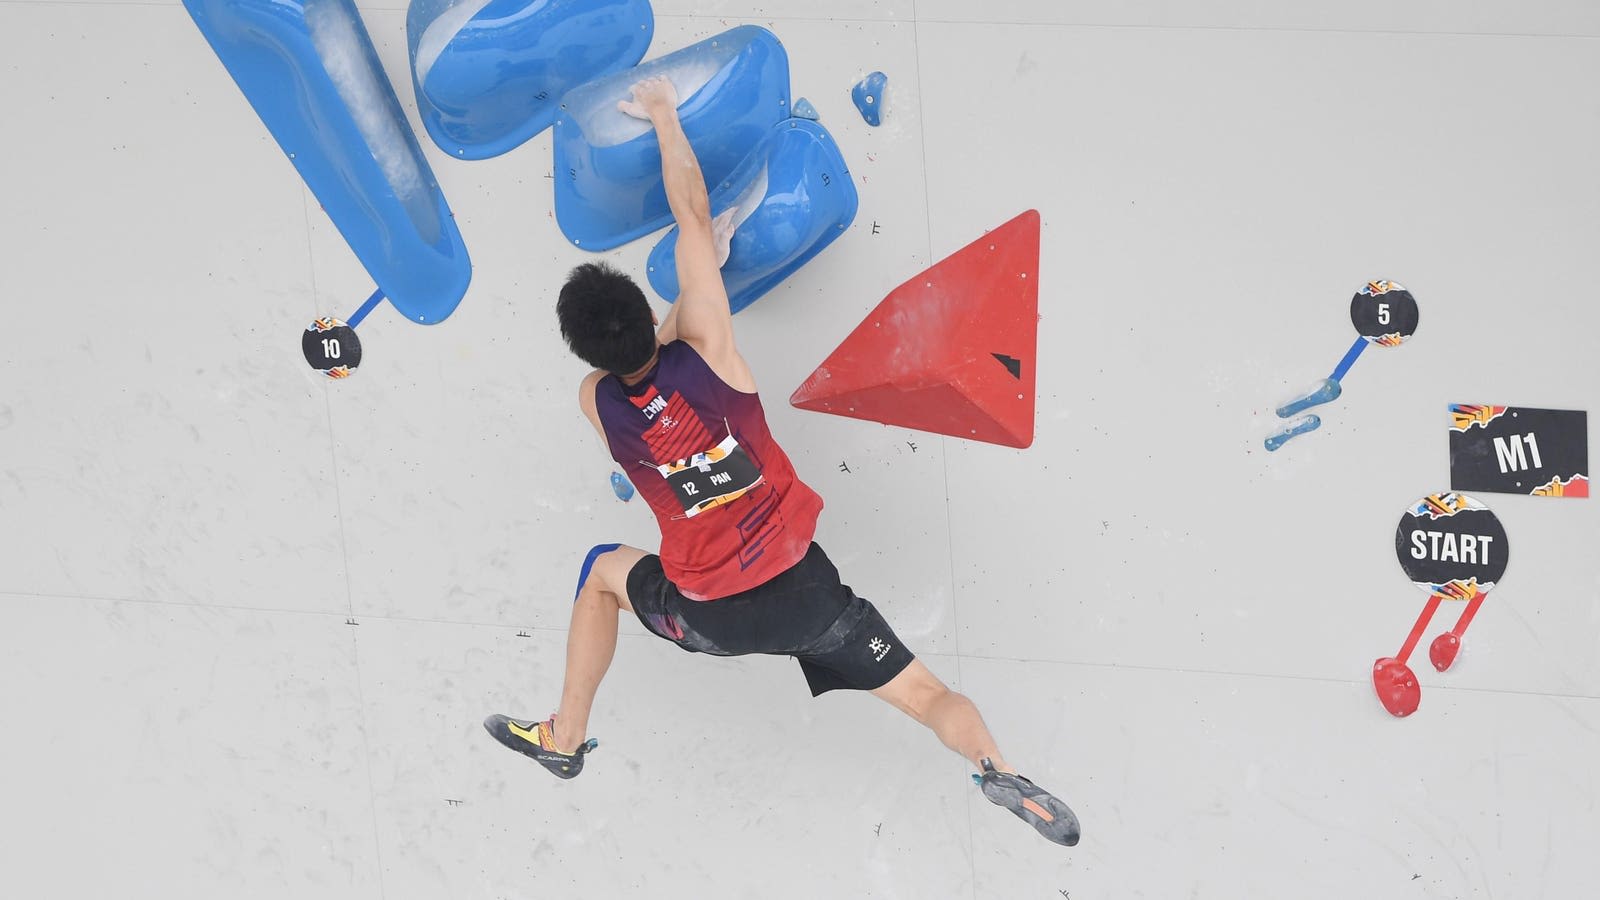 How To Watch Sport Climbing At The 2024 Paris Olympics